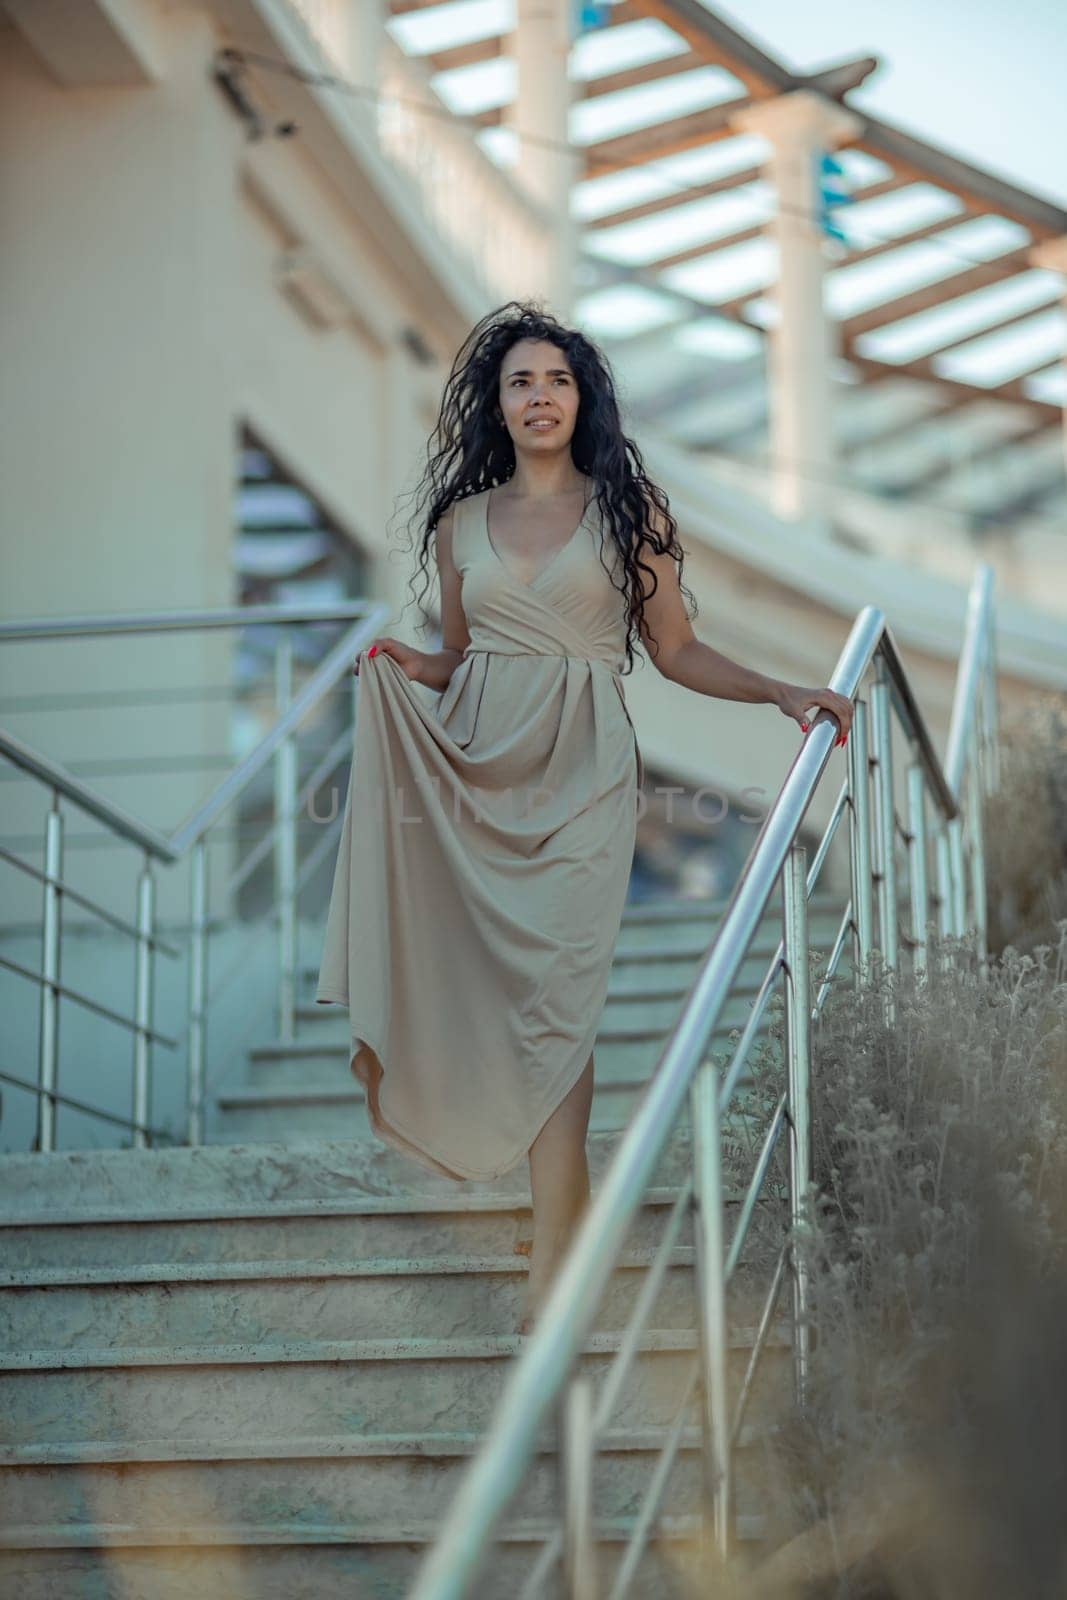 A woman in a dress stands on a set of stairs. The stairs are made of metal and are located in front of a building. The woman is wearing a necklace and a bracelet